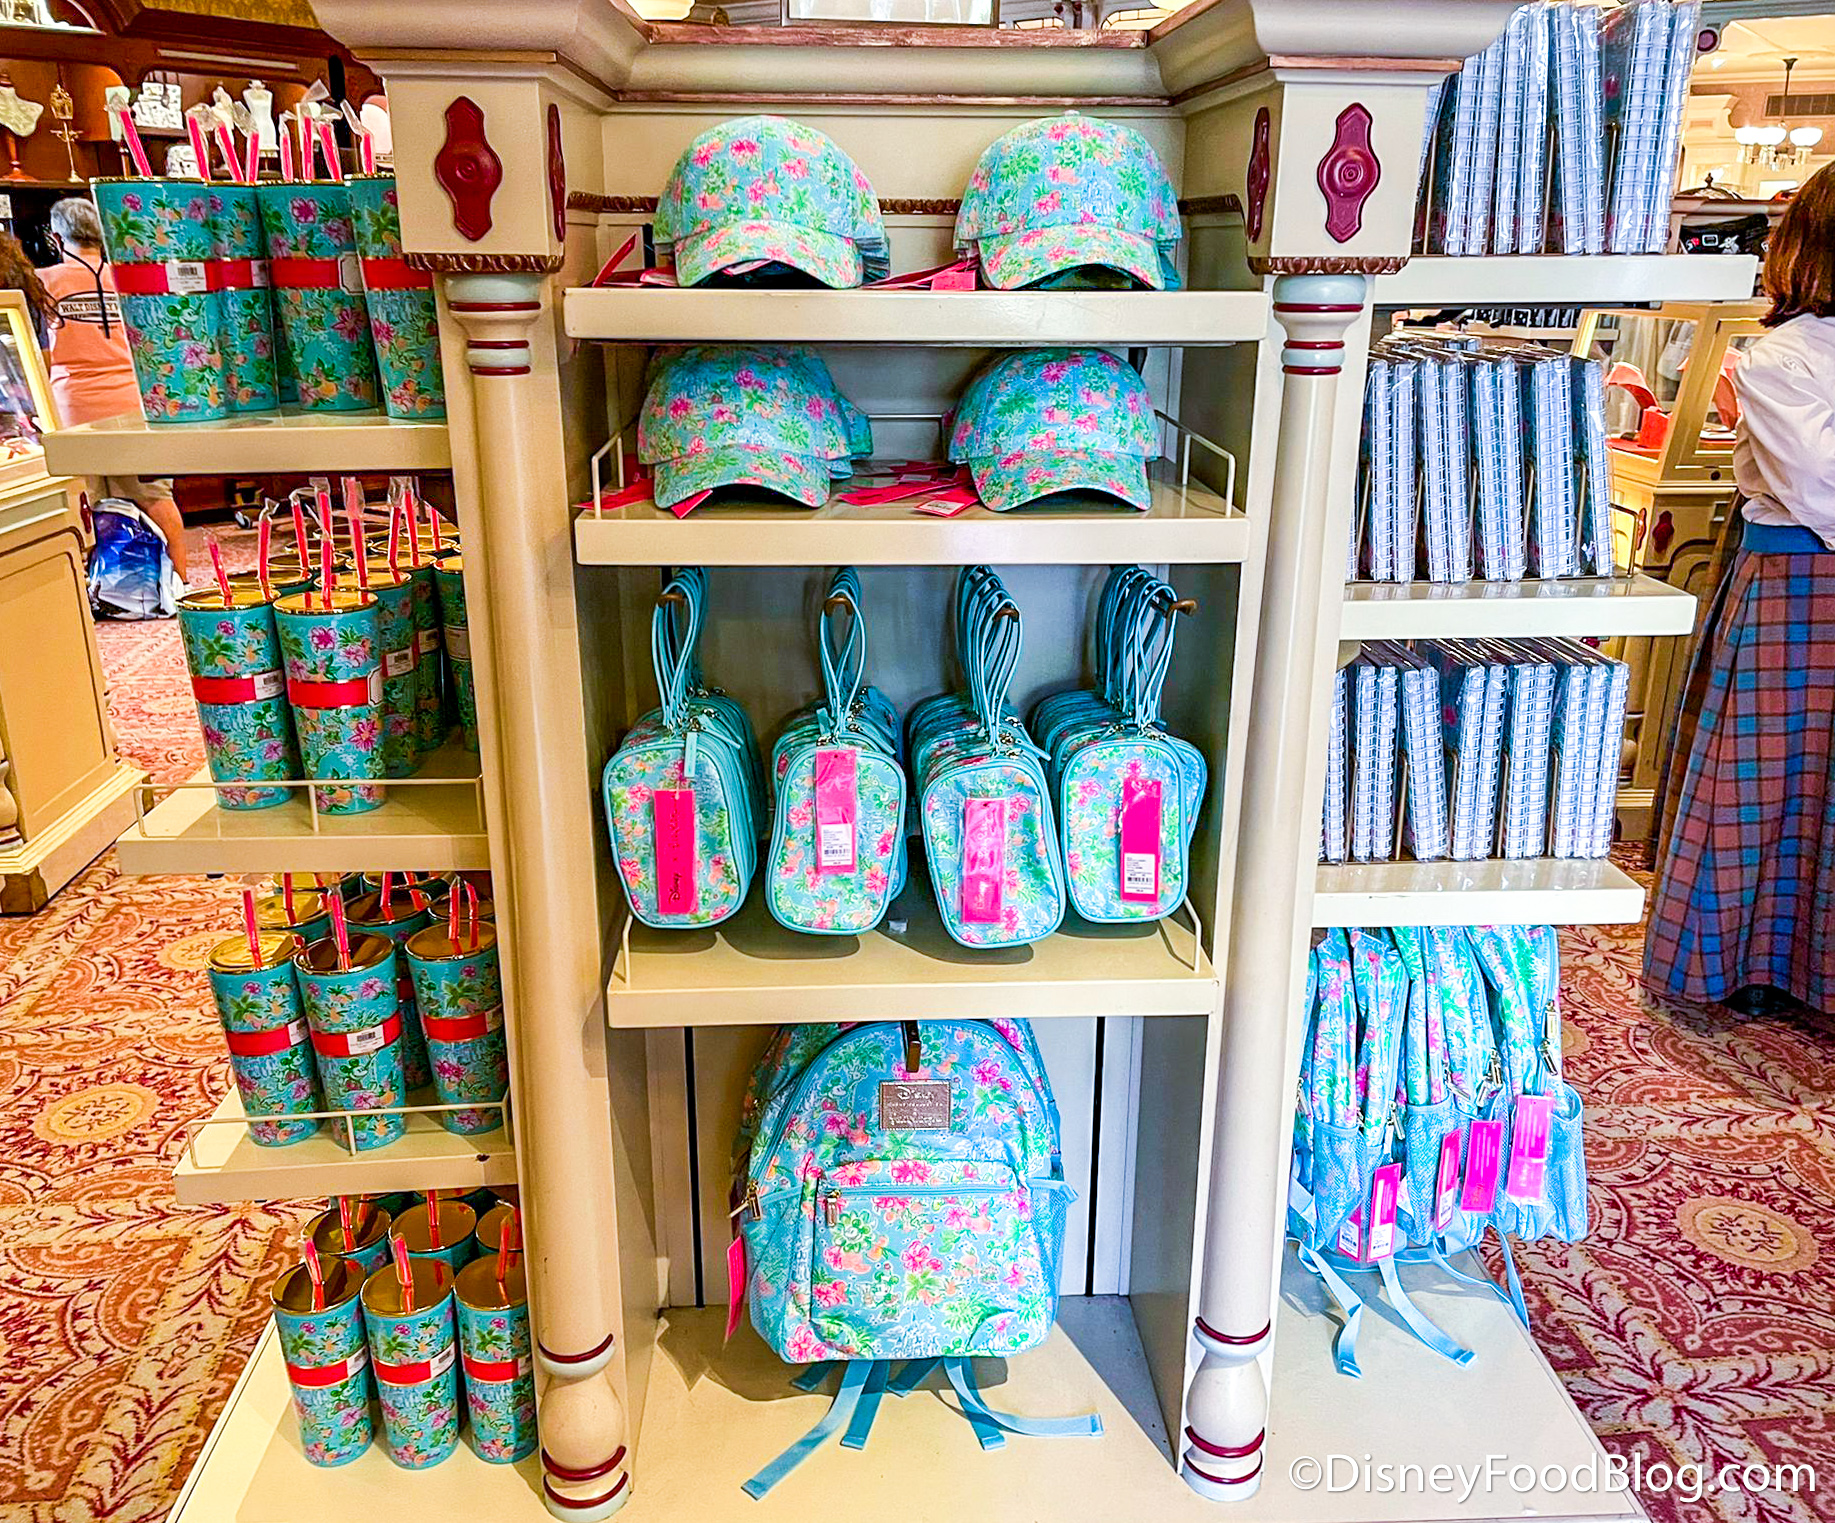 HURRY! The Sold Out Lilly Pulitzer Collection is Now in Disney World